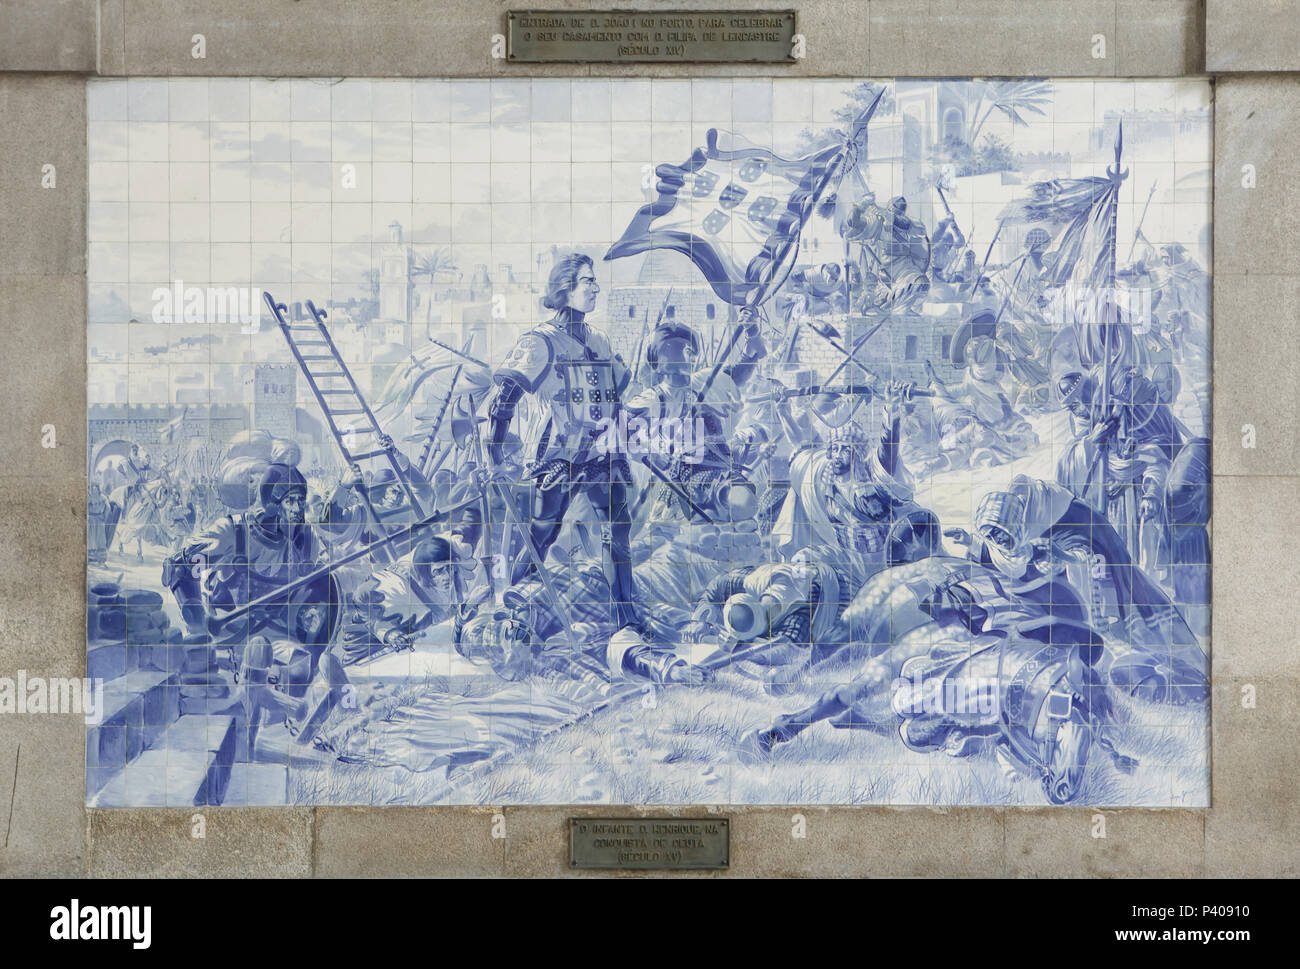 Prince Henry the Navigator (Infante Don Henrique of Portugal) during the Conquest of Ceuta in 1415 depicted in the azulejo panel painted by Portuguese painter Jorge Colaço in 1905-1916 in the São Bento railway station (Estação Ferroviária de São Bento) in Porto, Portugal. Stock Photo